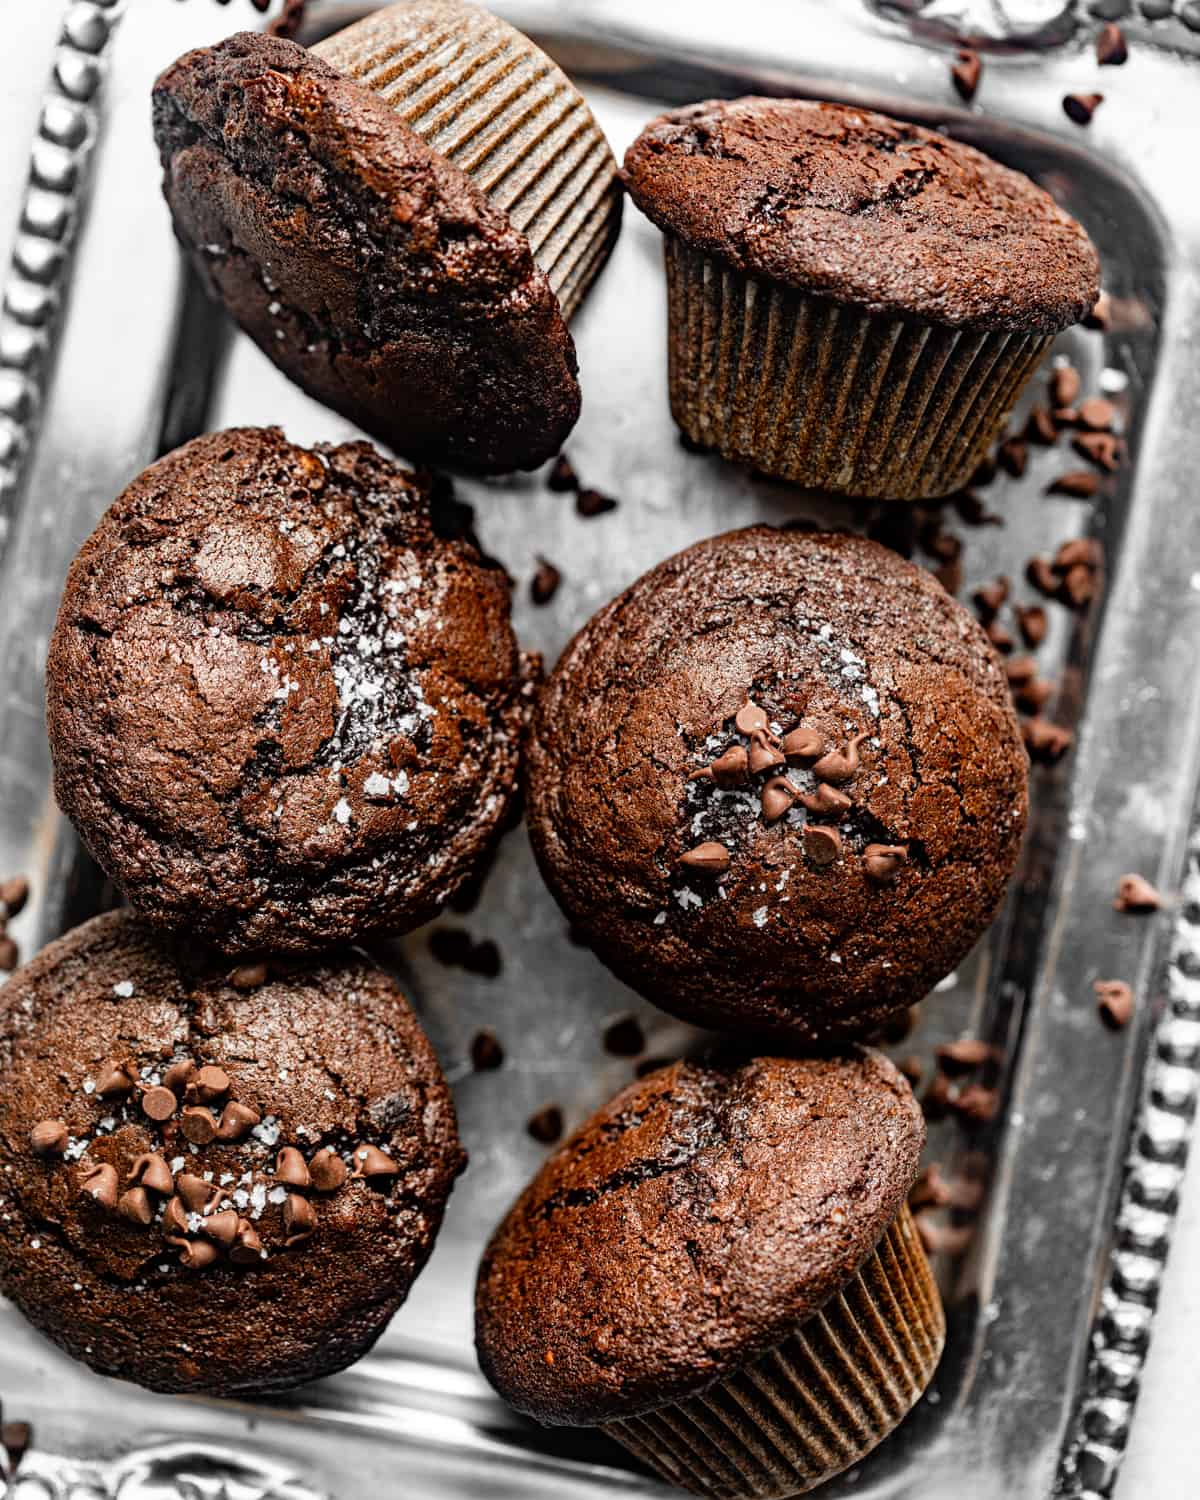 double chocolate chip muffins on a silver tray garnished with chocolate chips and flaky salt.